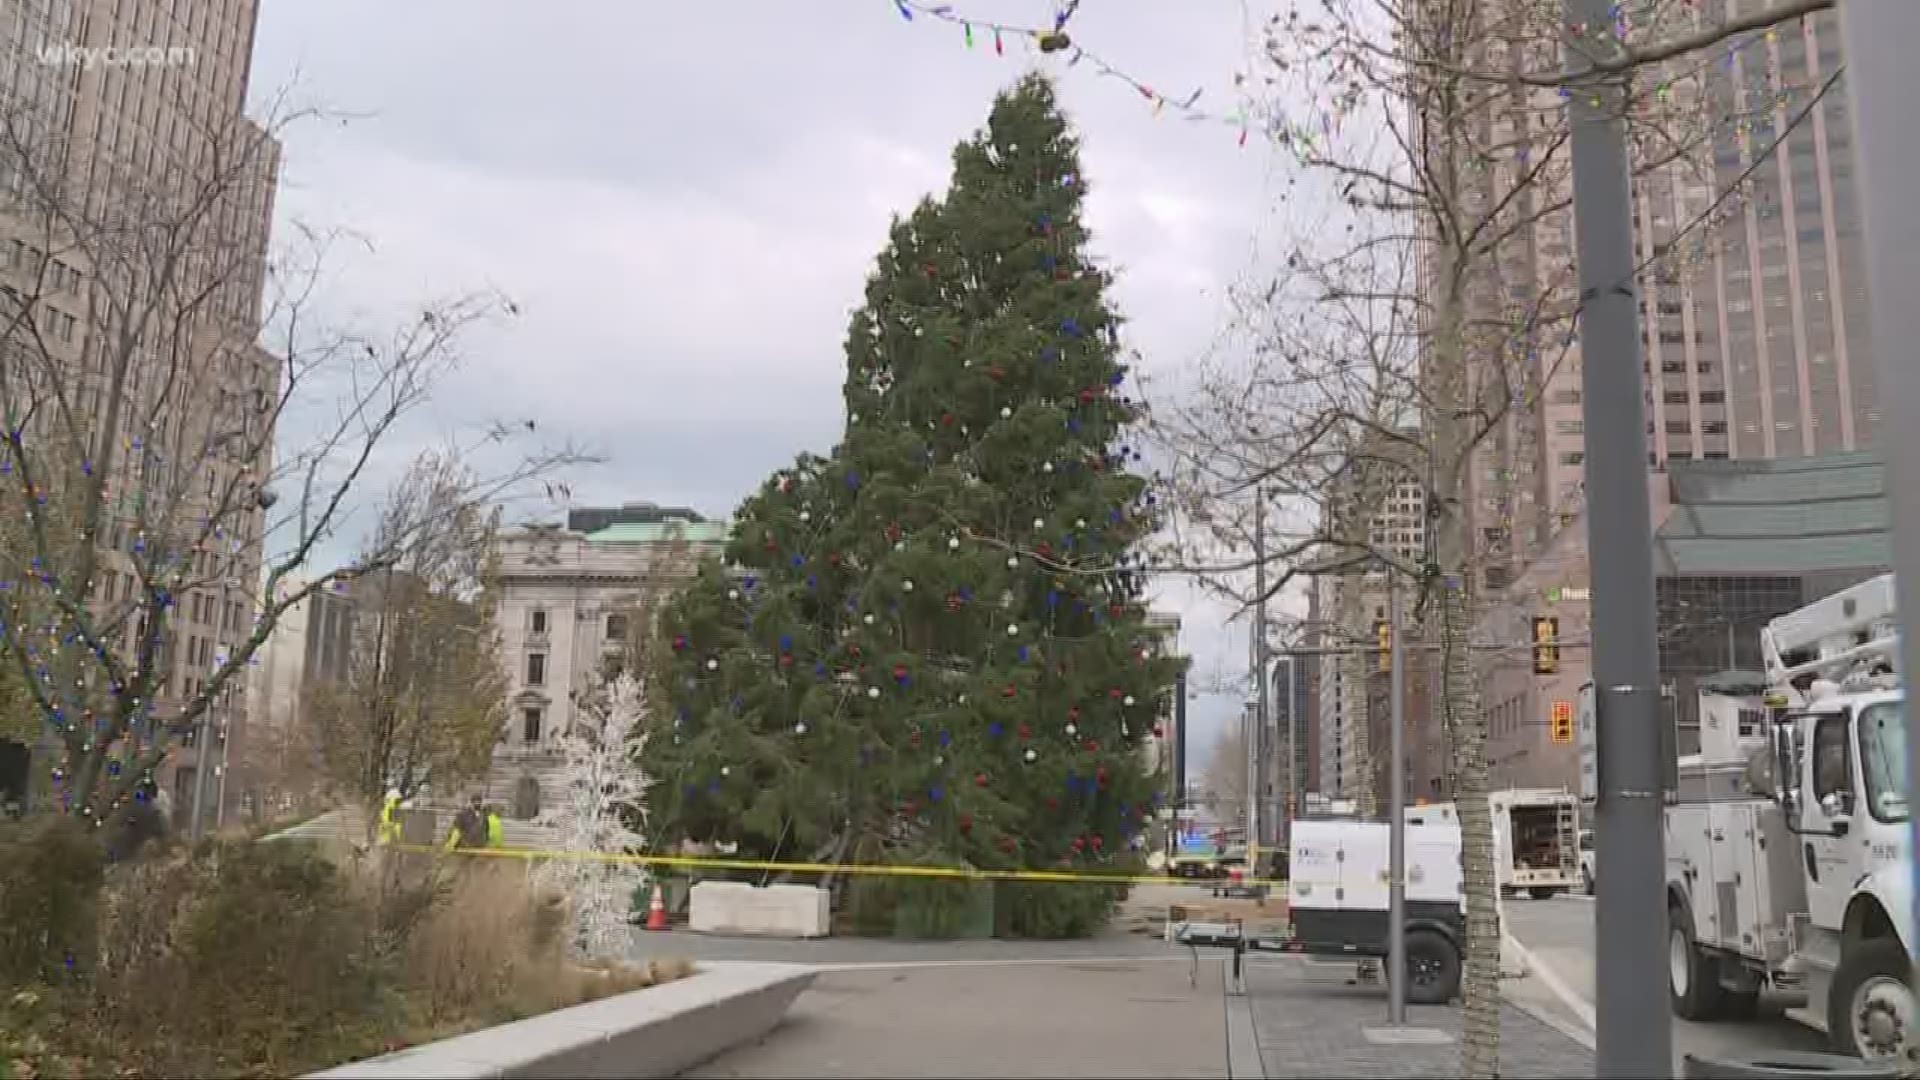 The holiday tree, installed earlier this month, is leaning due to high winds. Public Square has been closed to both pedestrians and drivers.